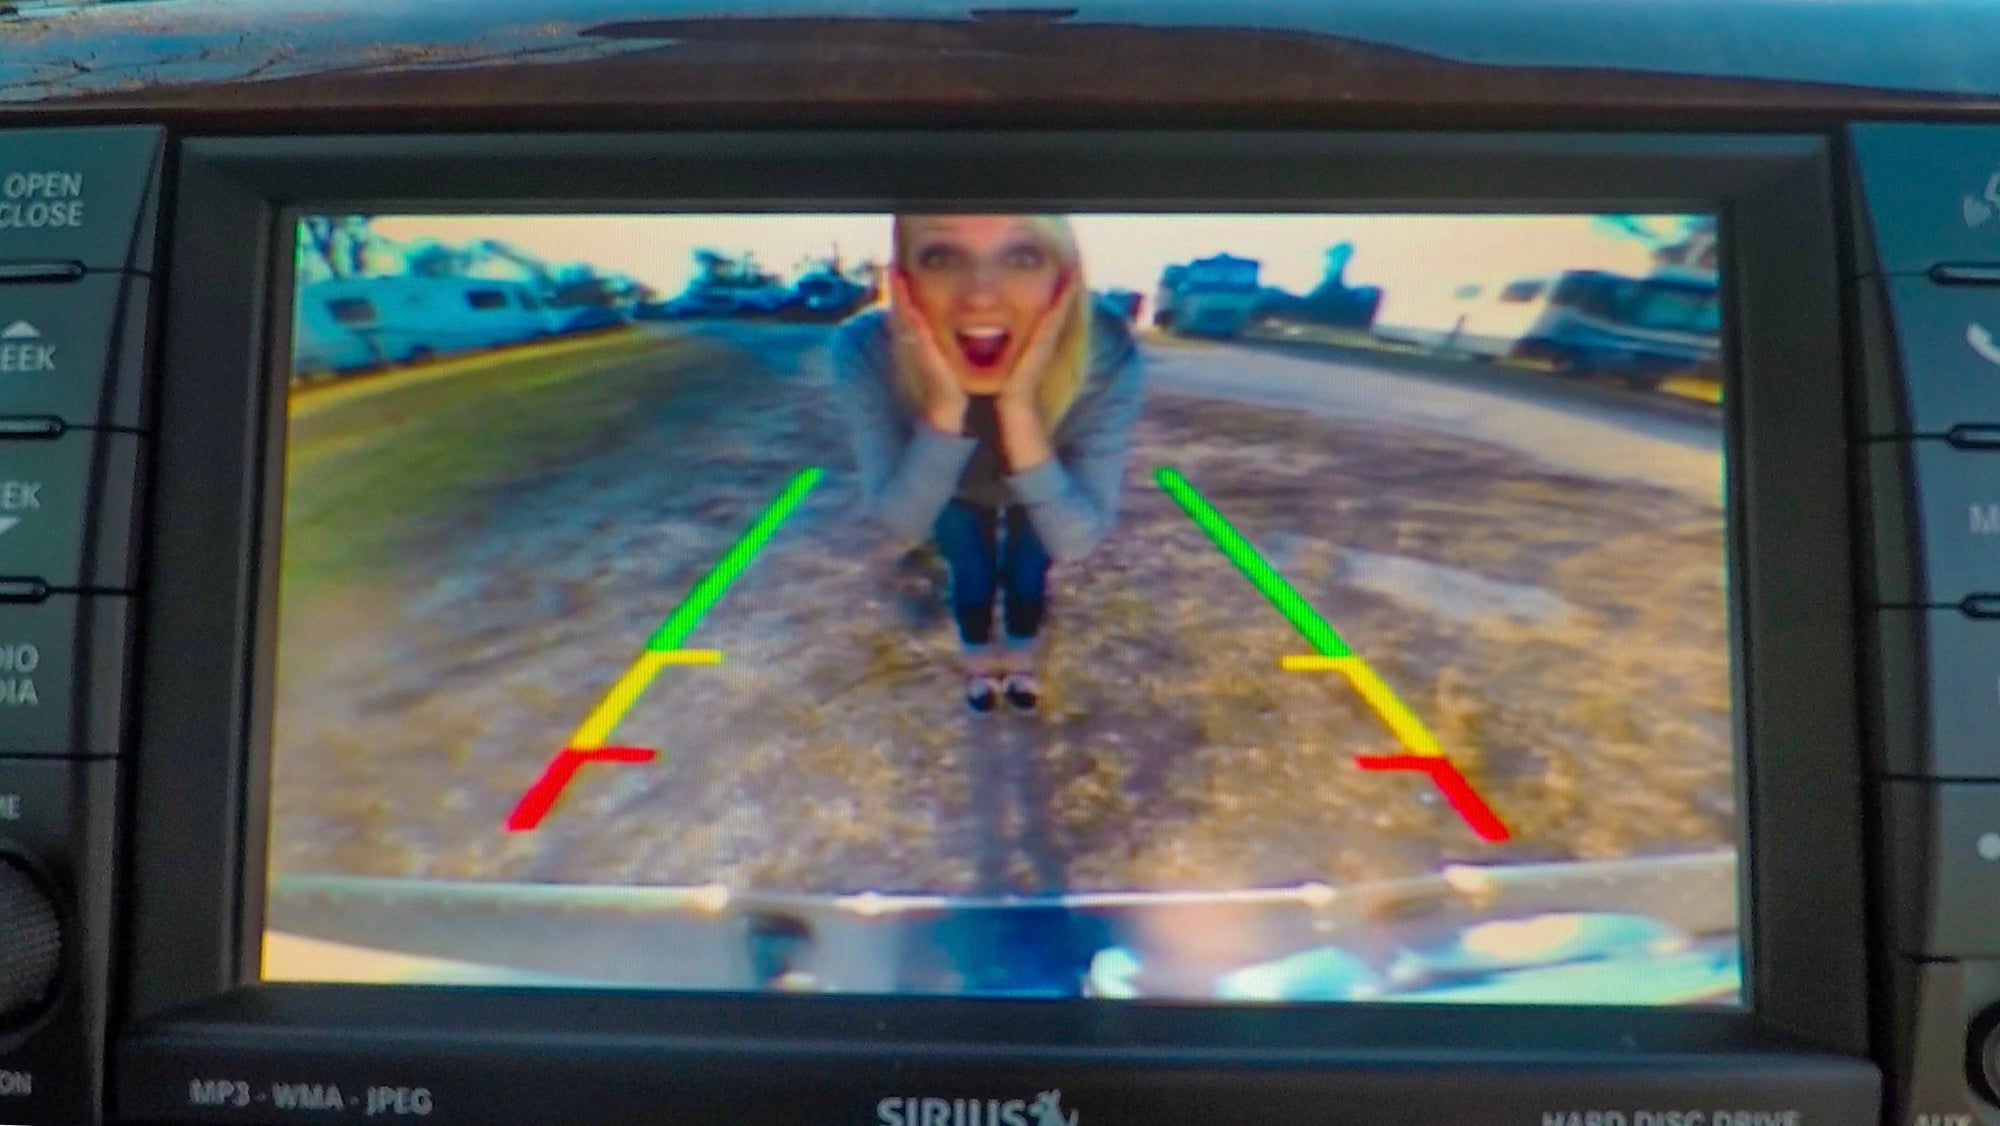 An RV Backup Camera is a good investment for new or seasoned RVers.